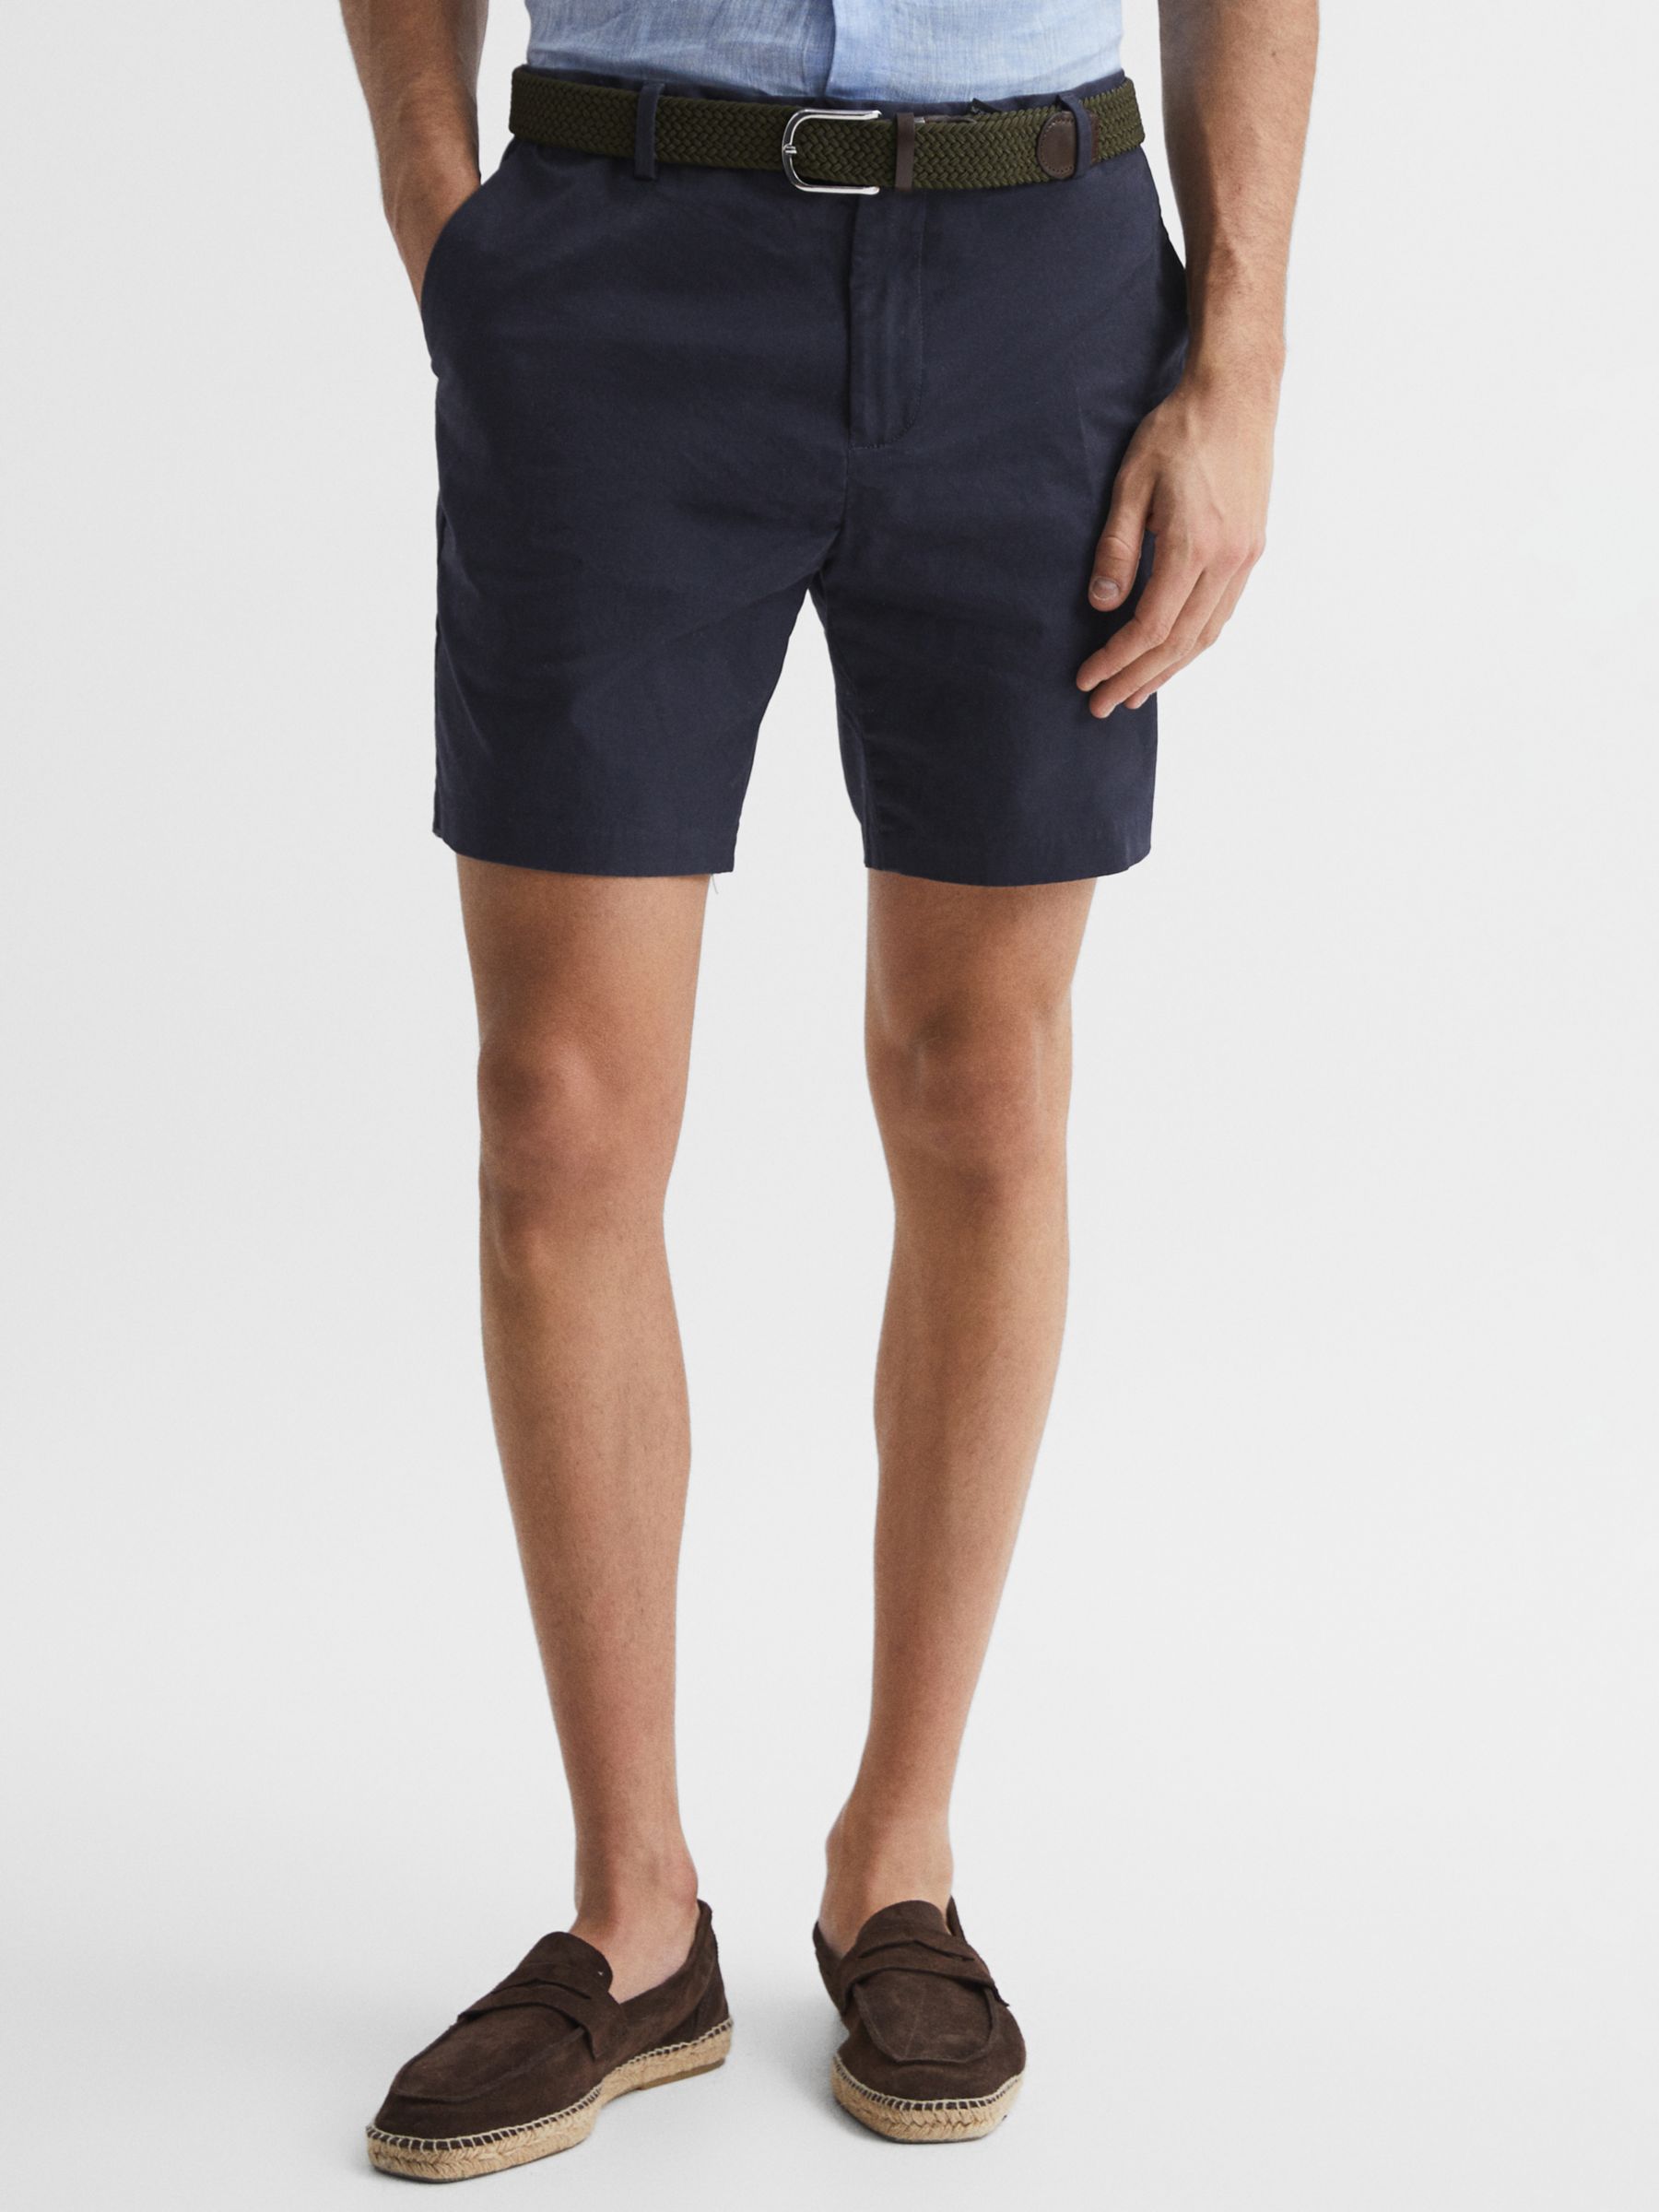 Reiss Wicket Casual Chino Shorts, Navy, 34R